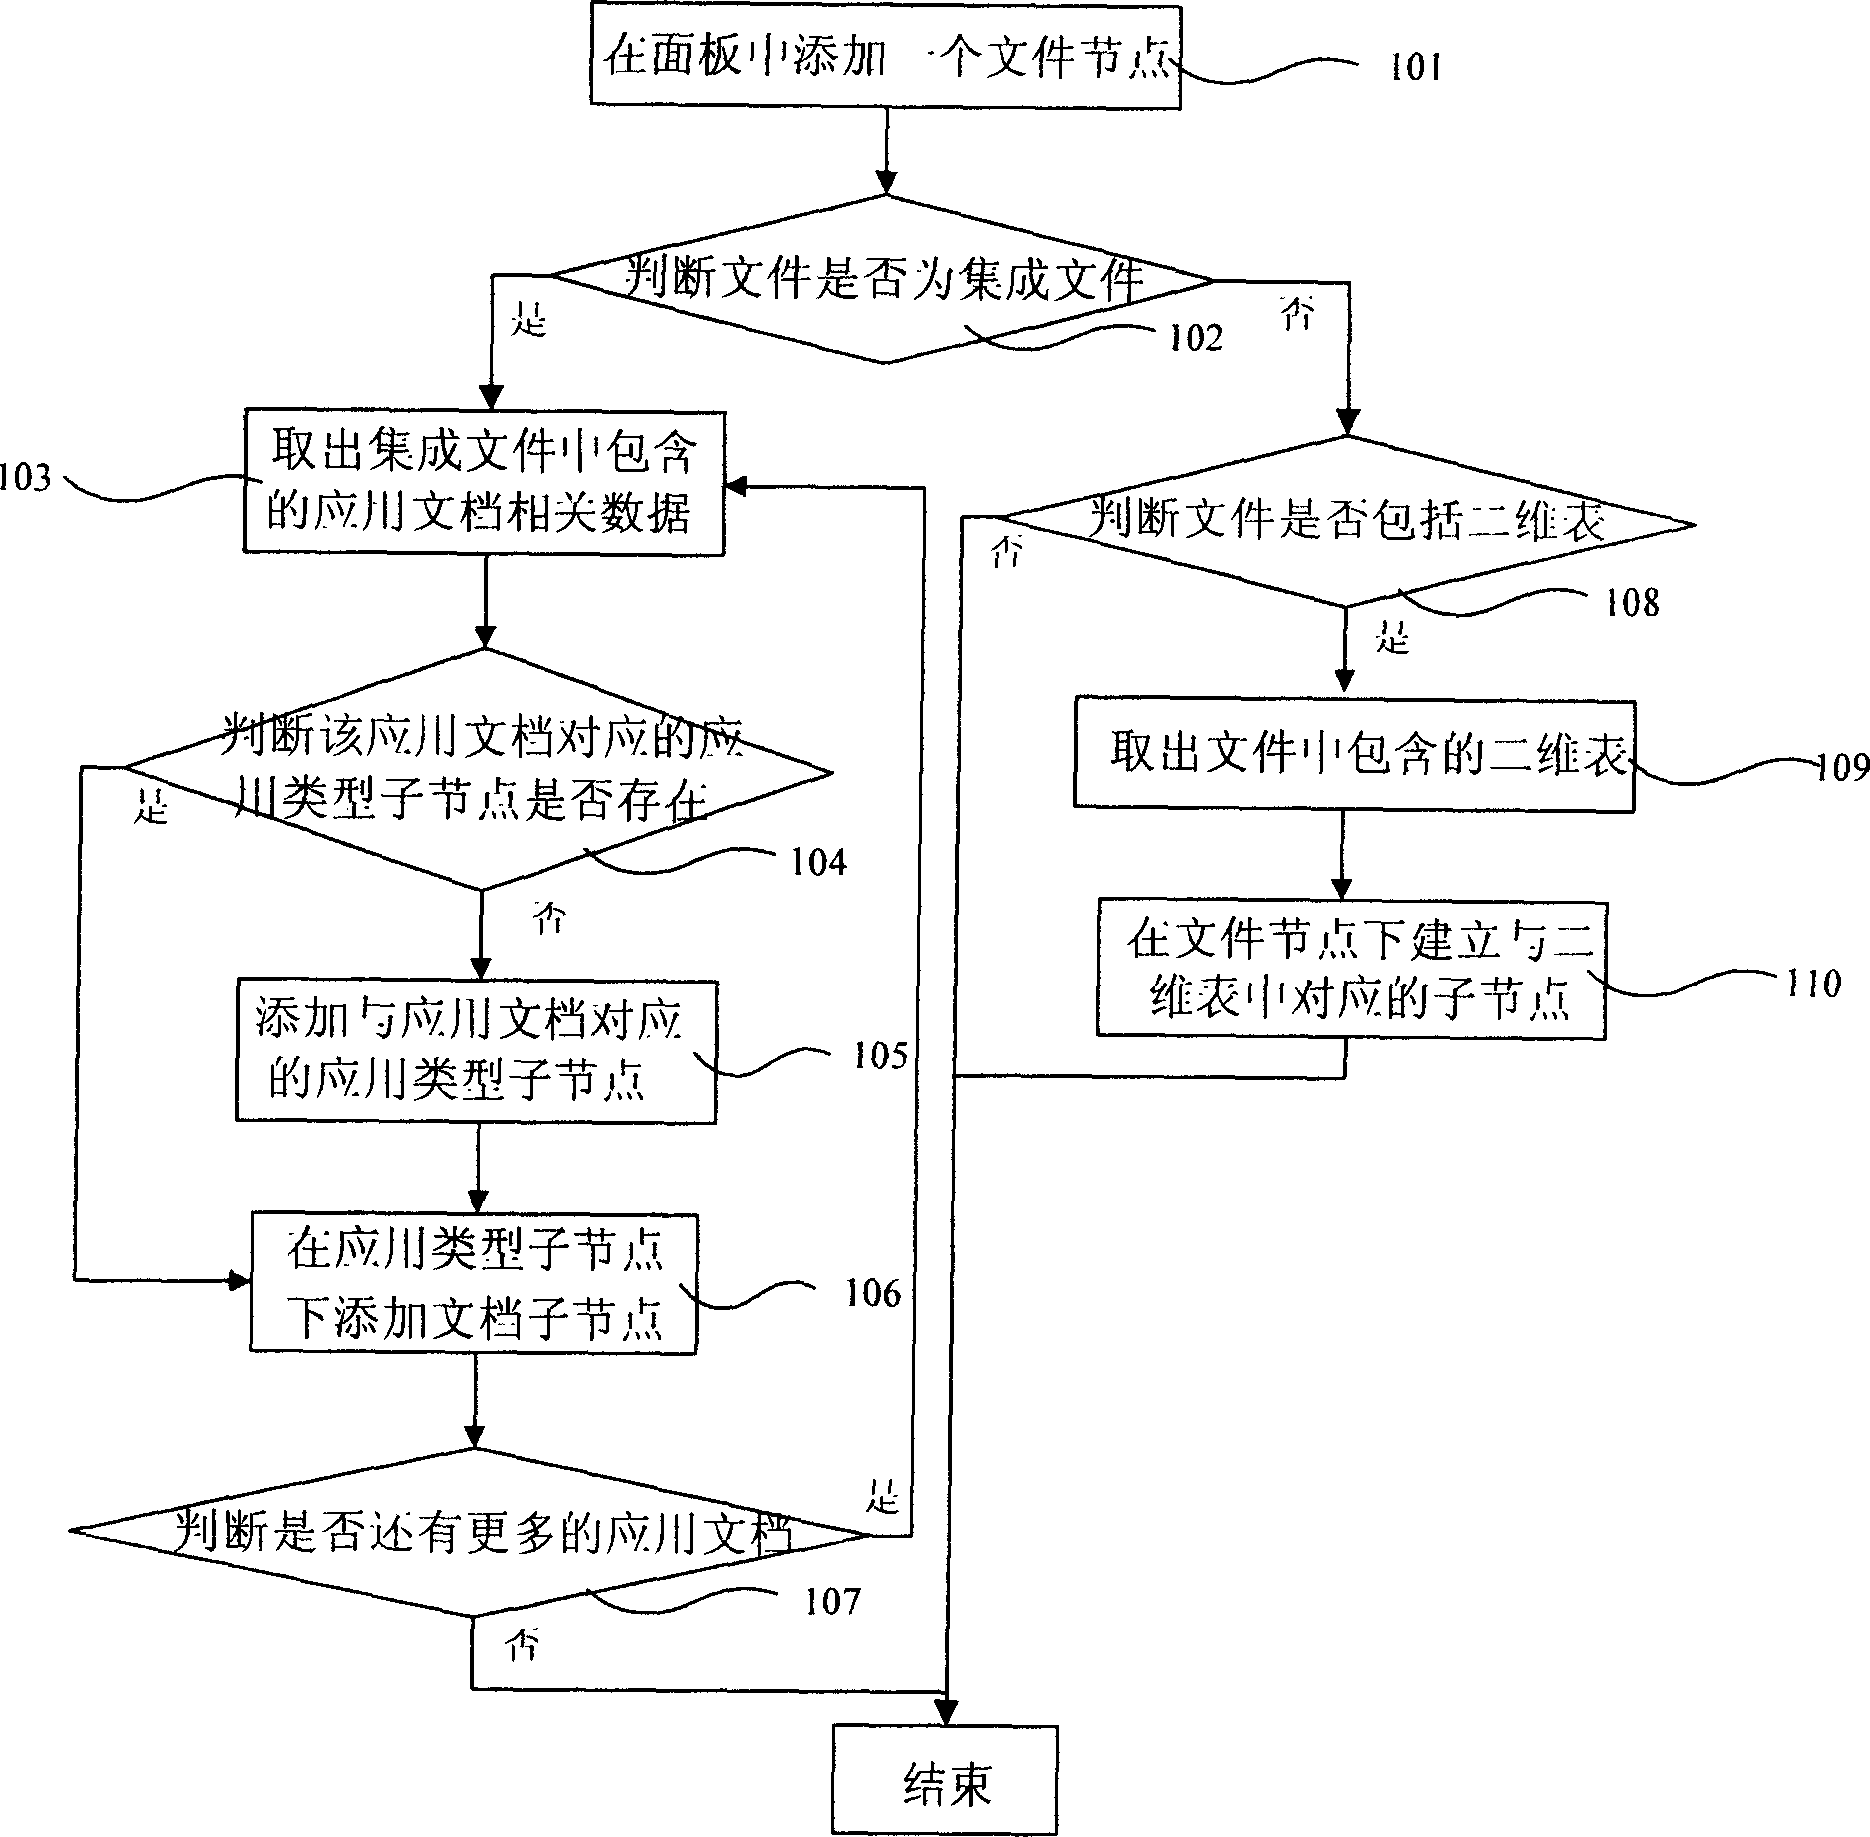 Method for building tree file structure in computer